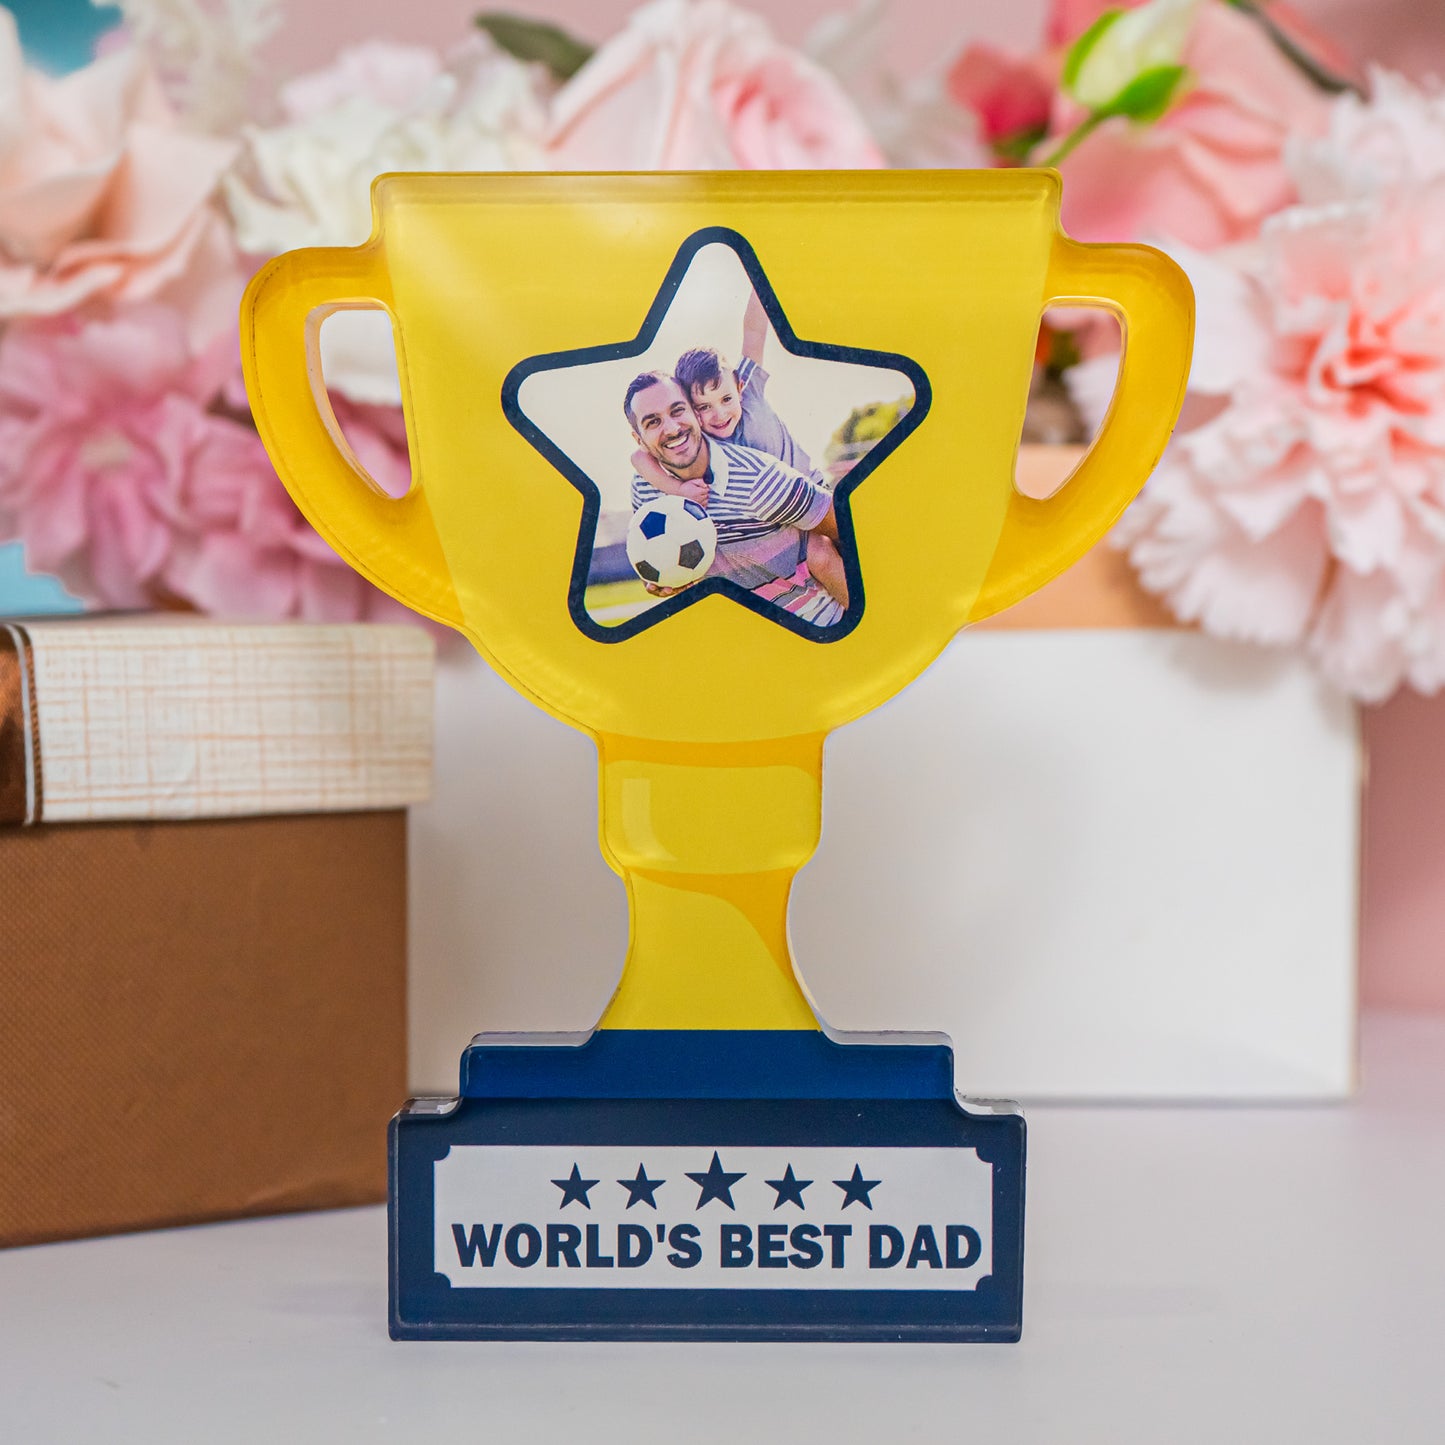 World's Best Dad - Personalized Acrylic Photo Plaque